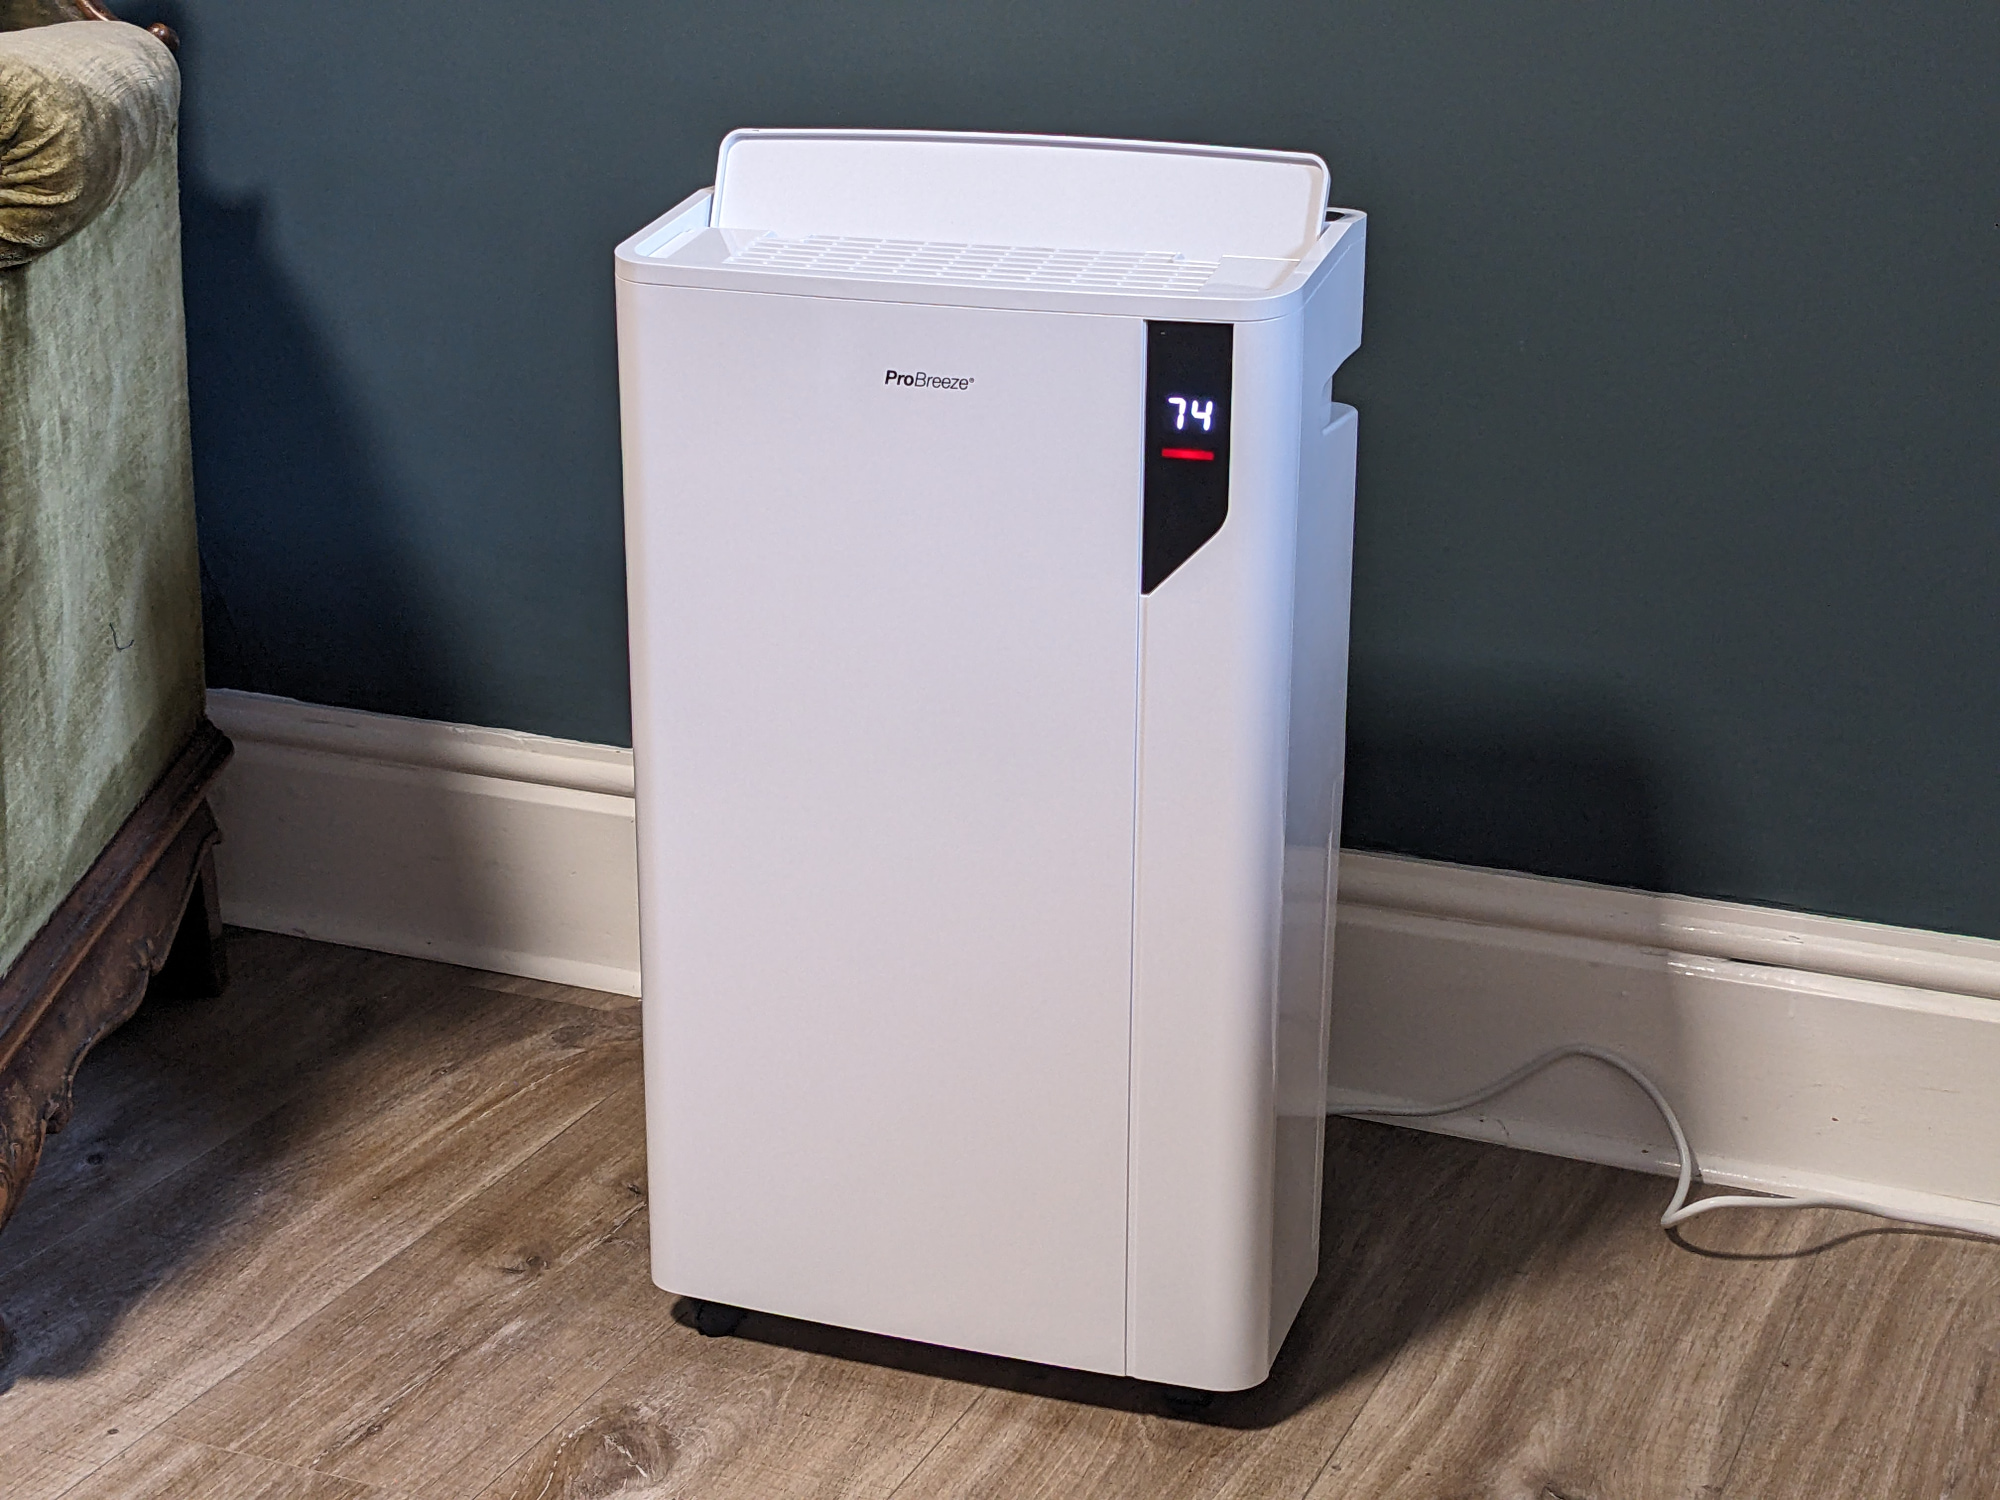 $49 Pro Breeze Dehumidifier Unboxing and Testing 